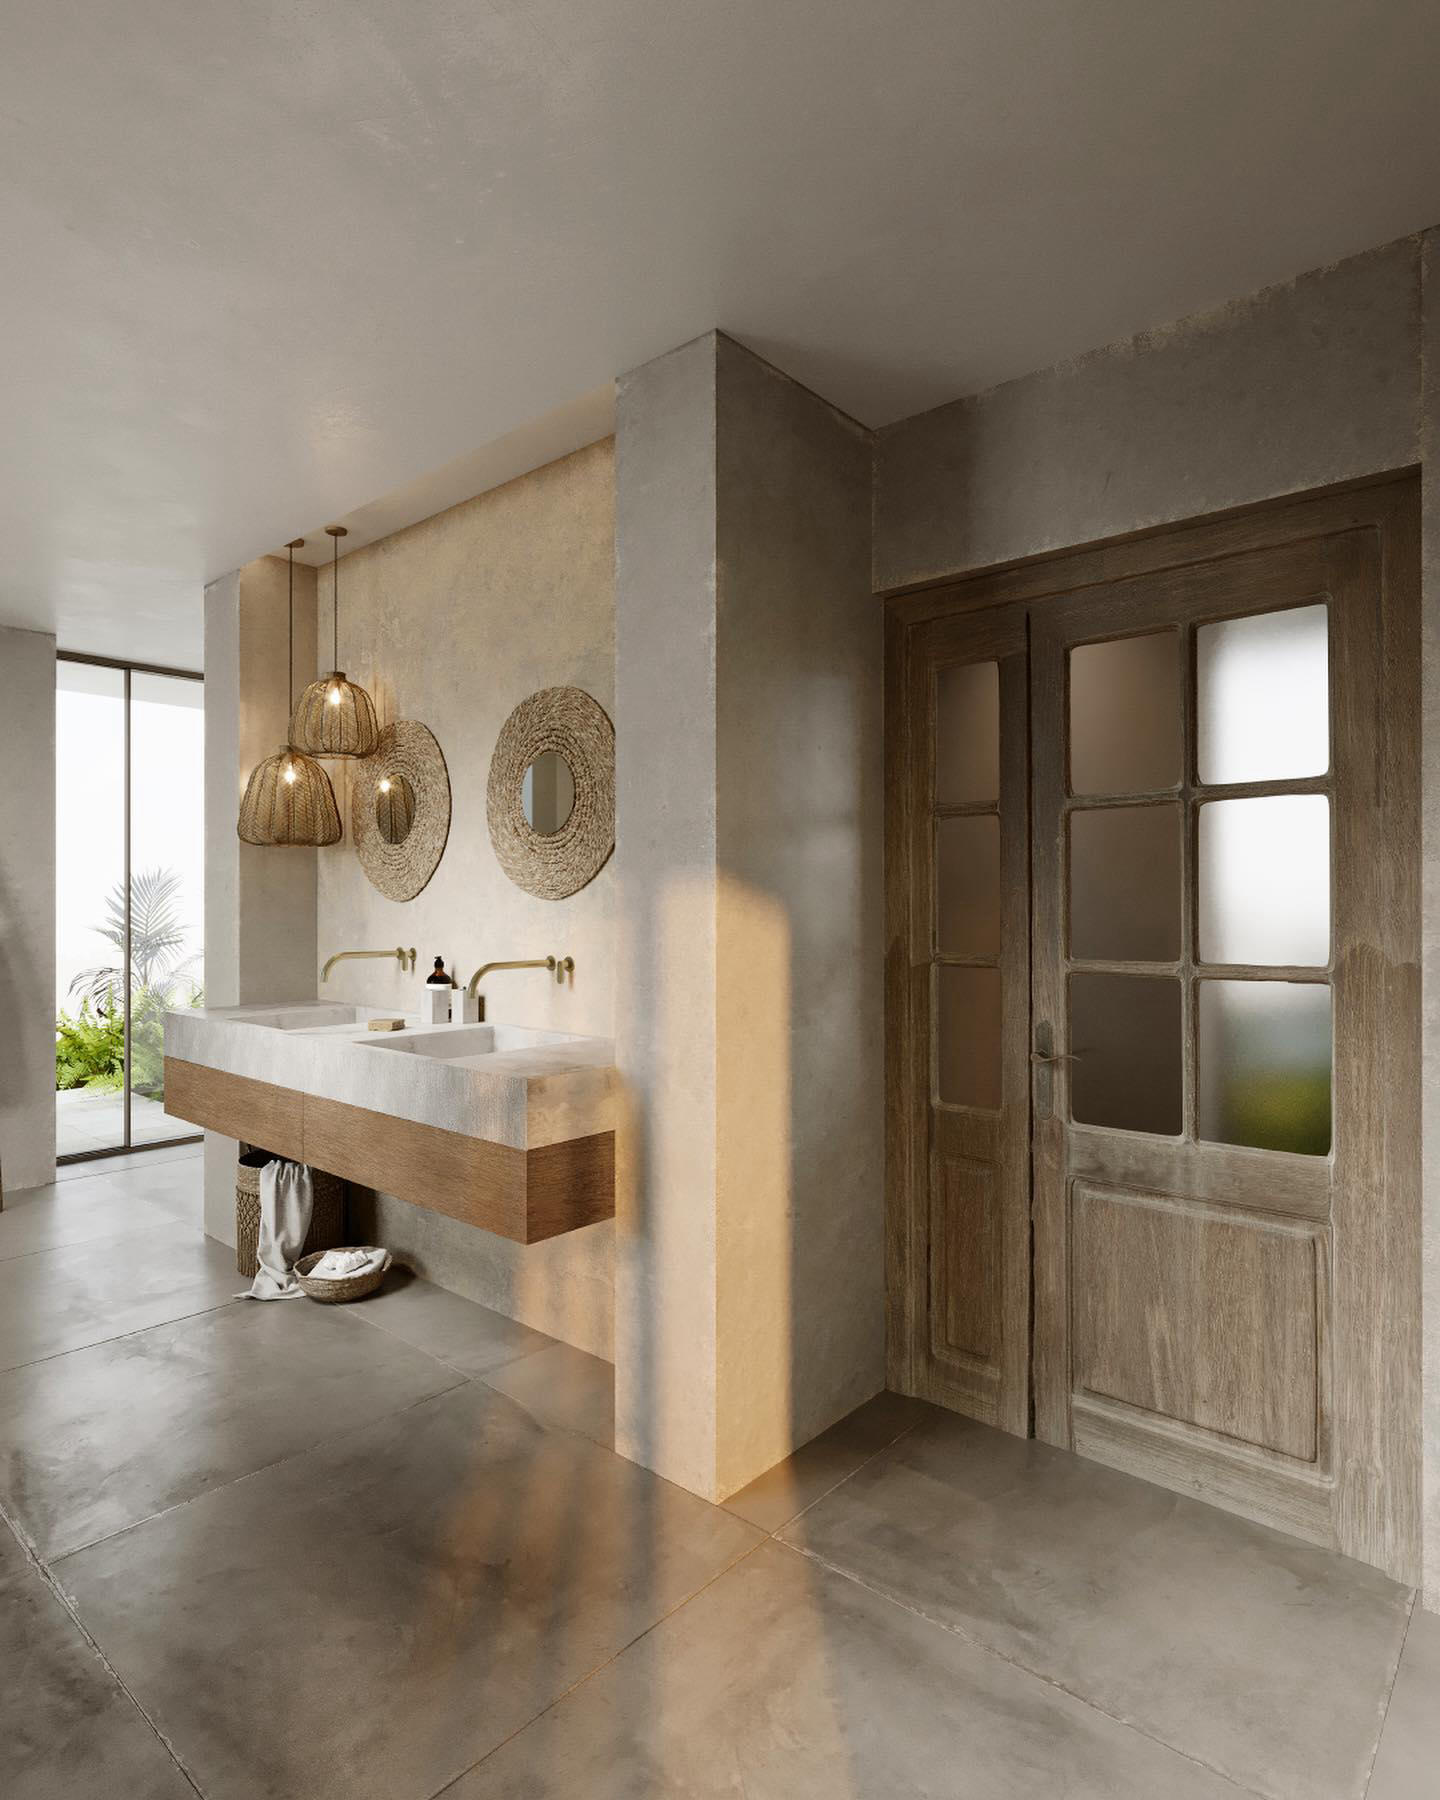 image  1 Lordd_Products - #cocoonbathroom designed this Rustic chic bathroom, which part is your favorite